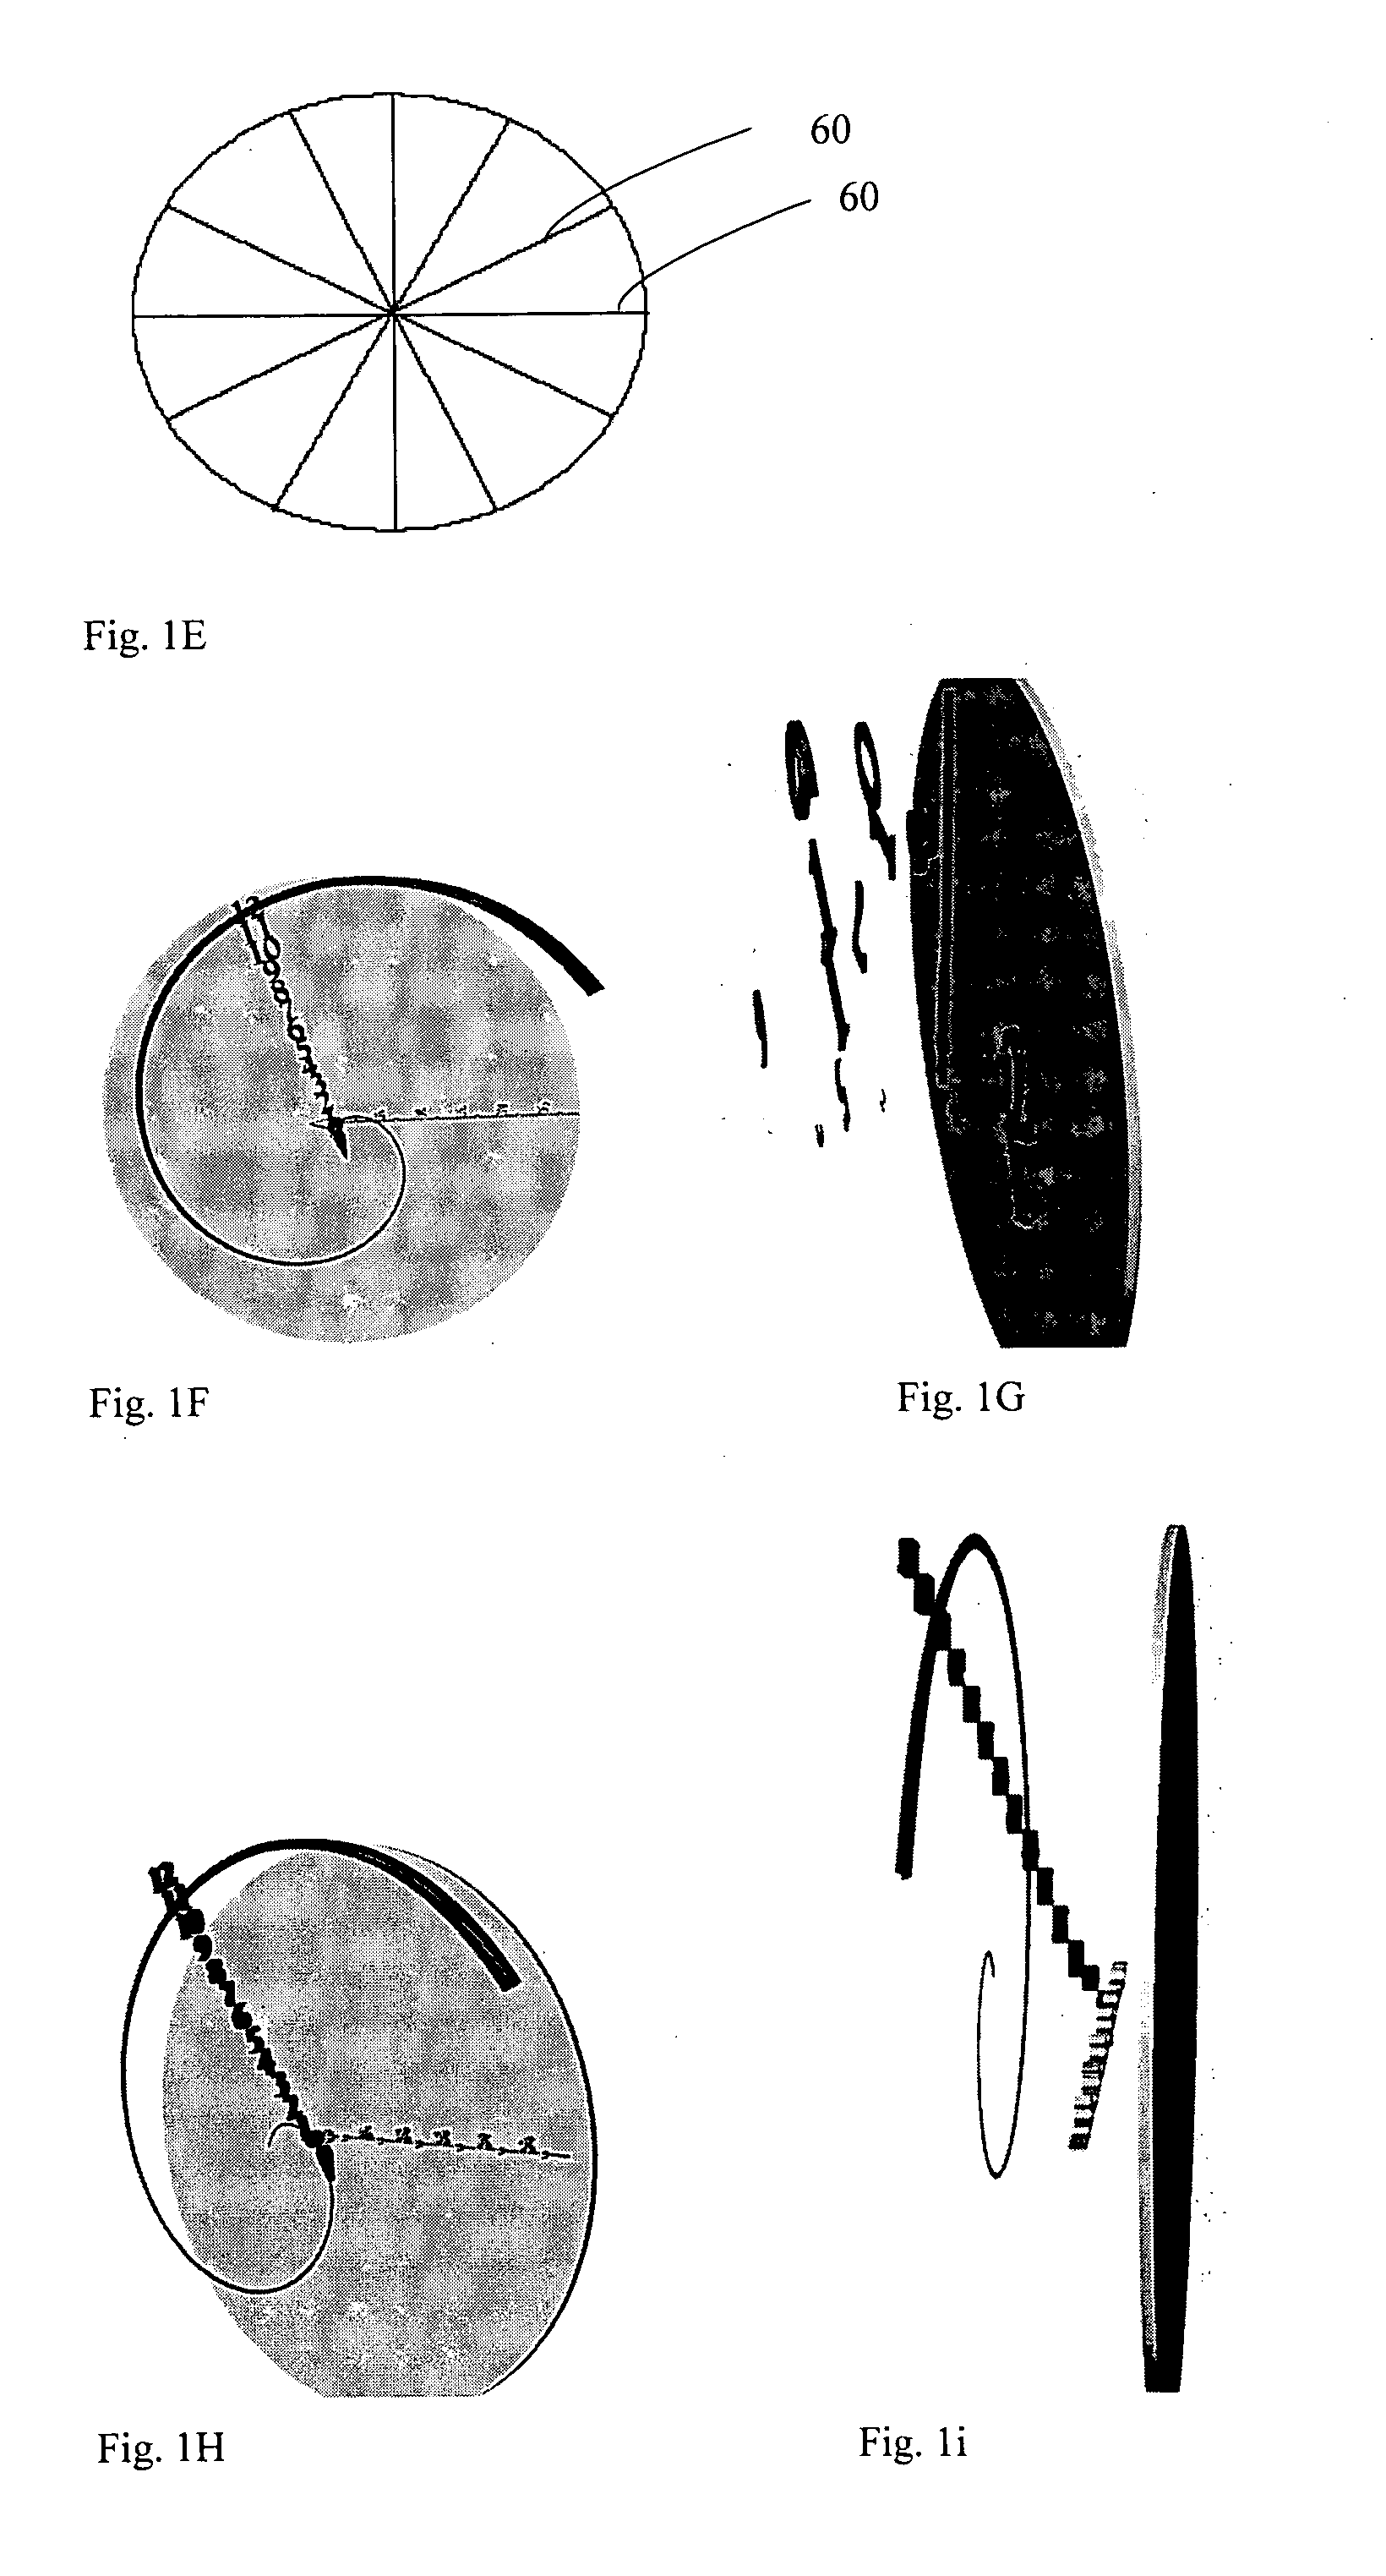 Means and method for calculating, measuring and displaying a measurable quantity